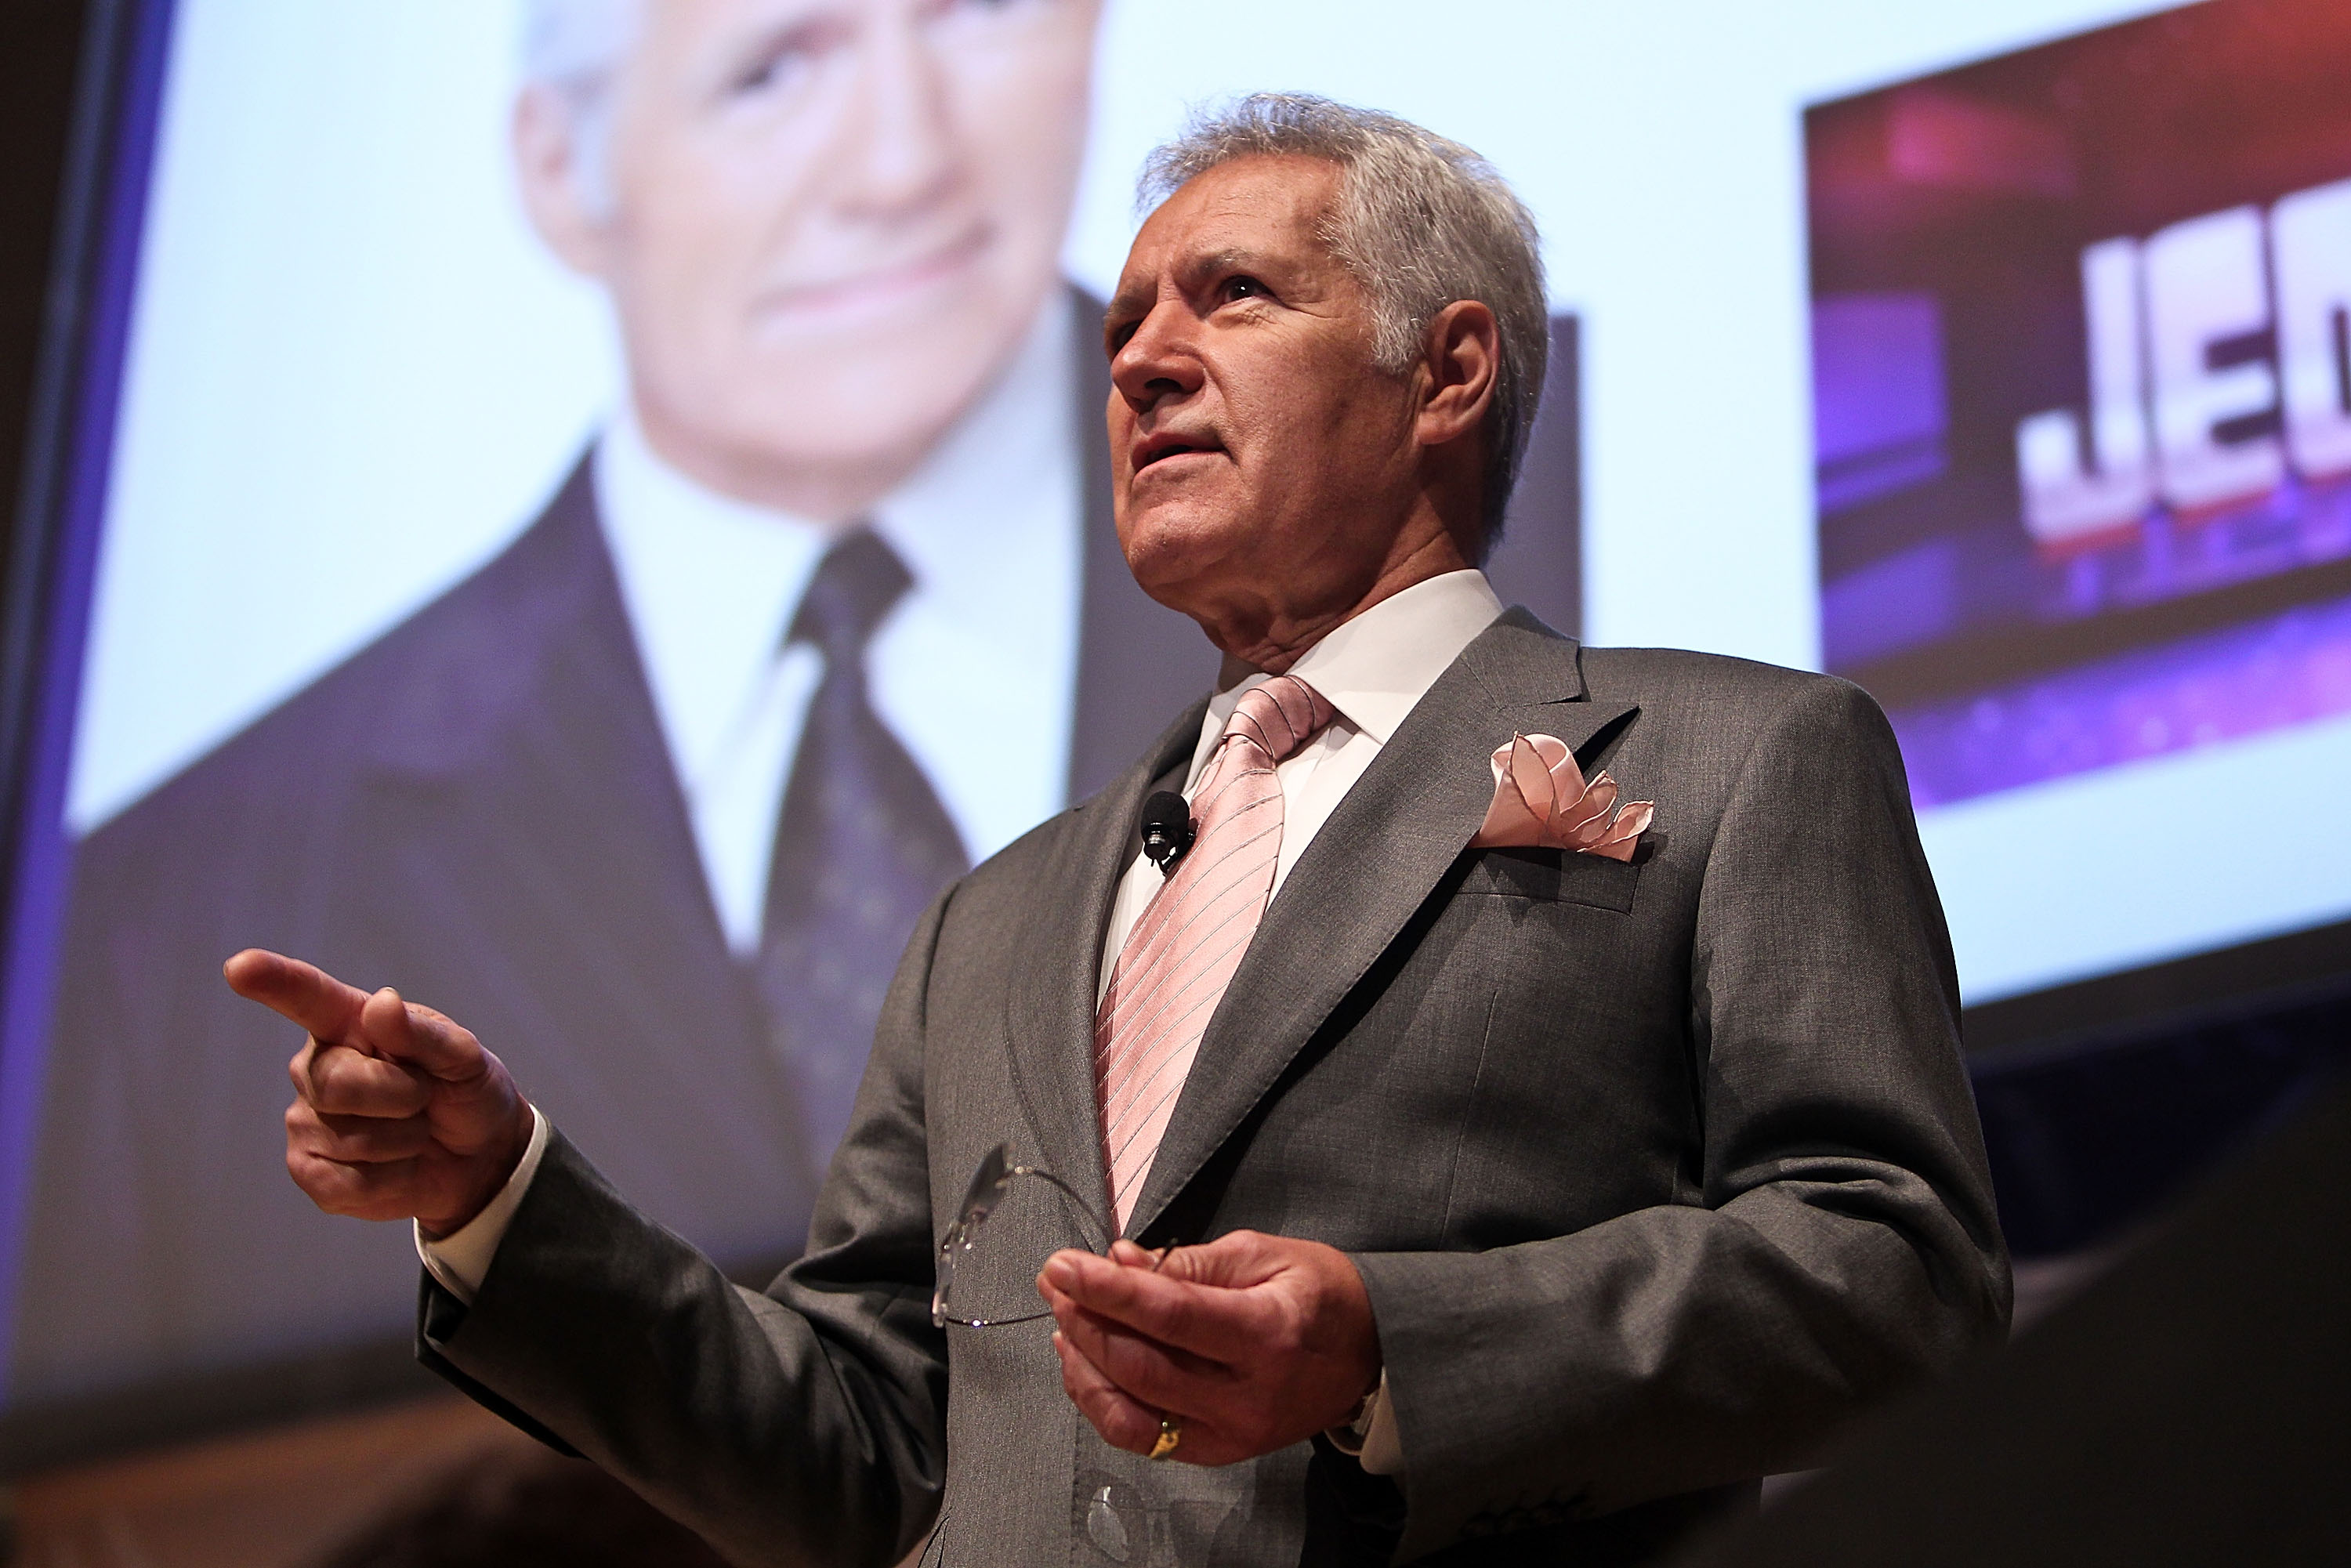 Late 'Jeopardy!' host Alex Trebek addresses an audience at a 2011 event